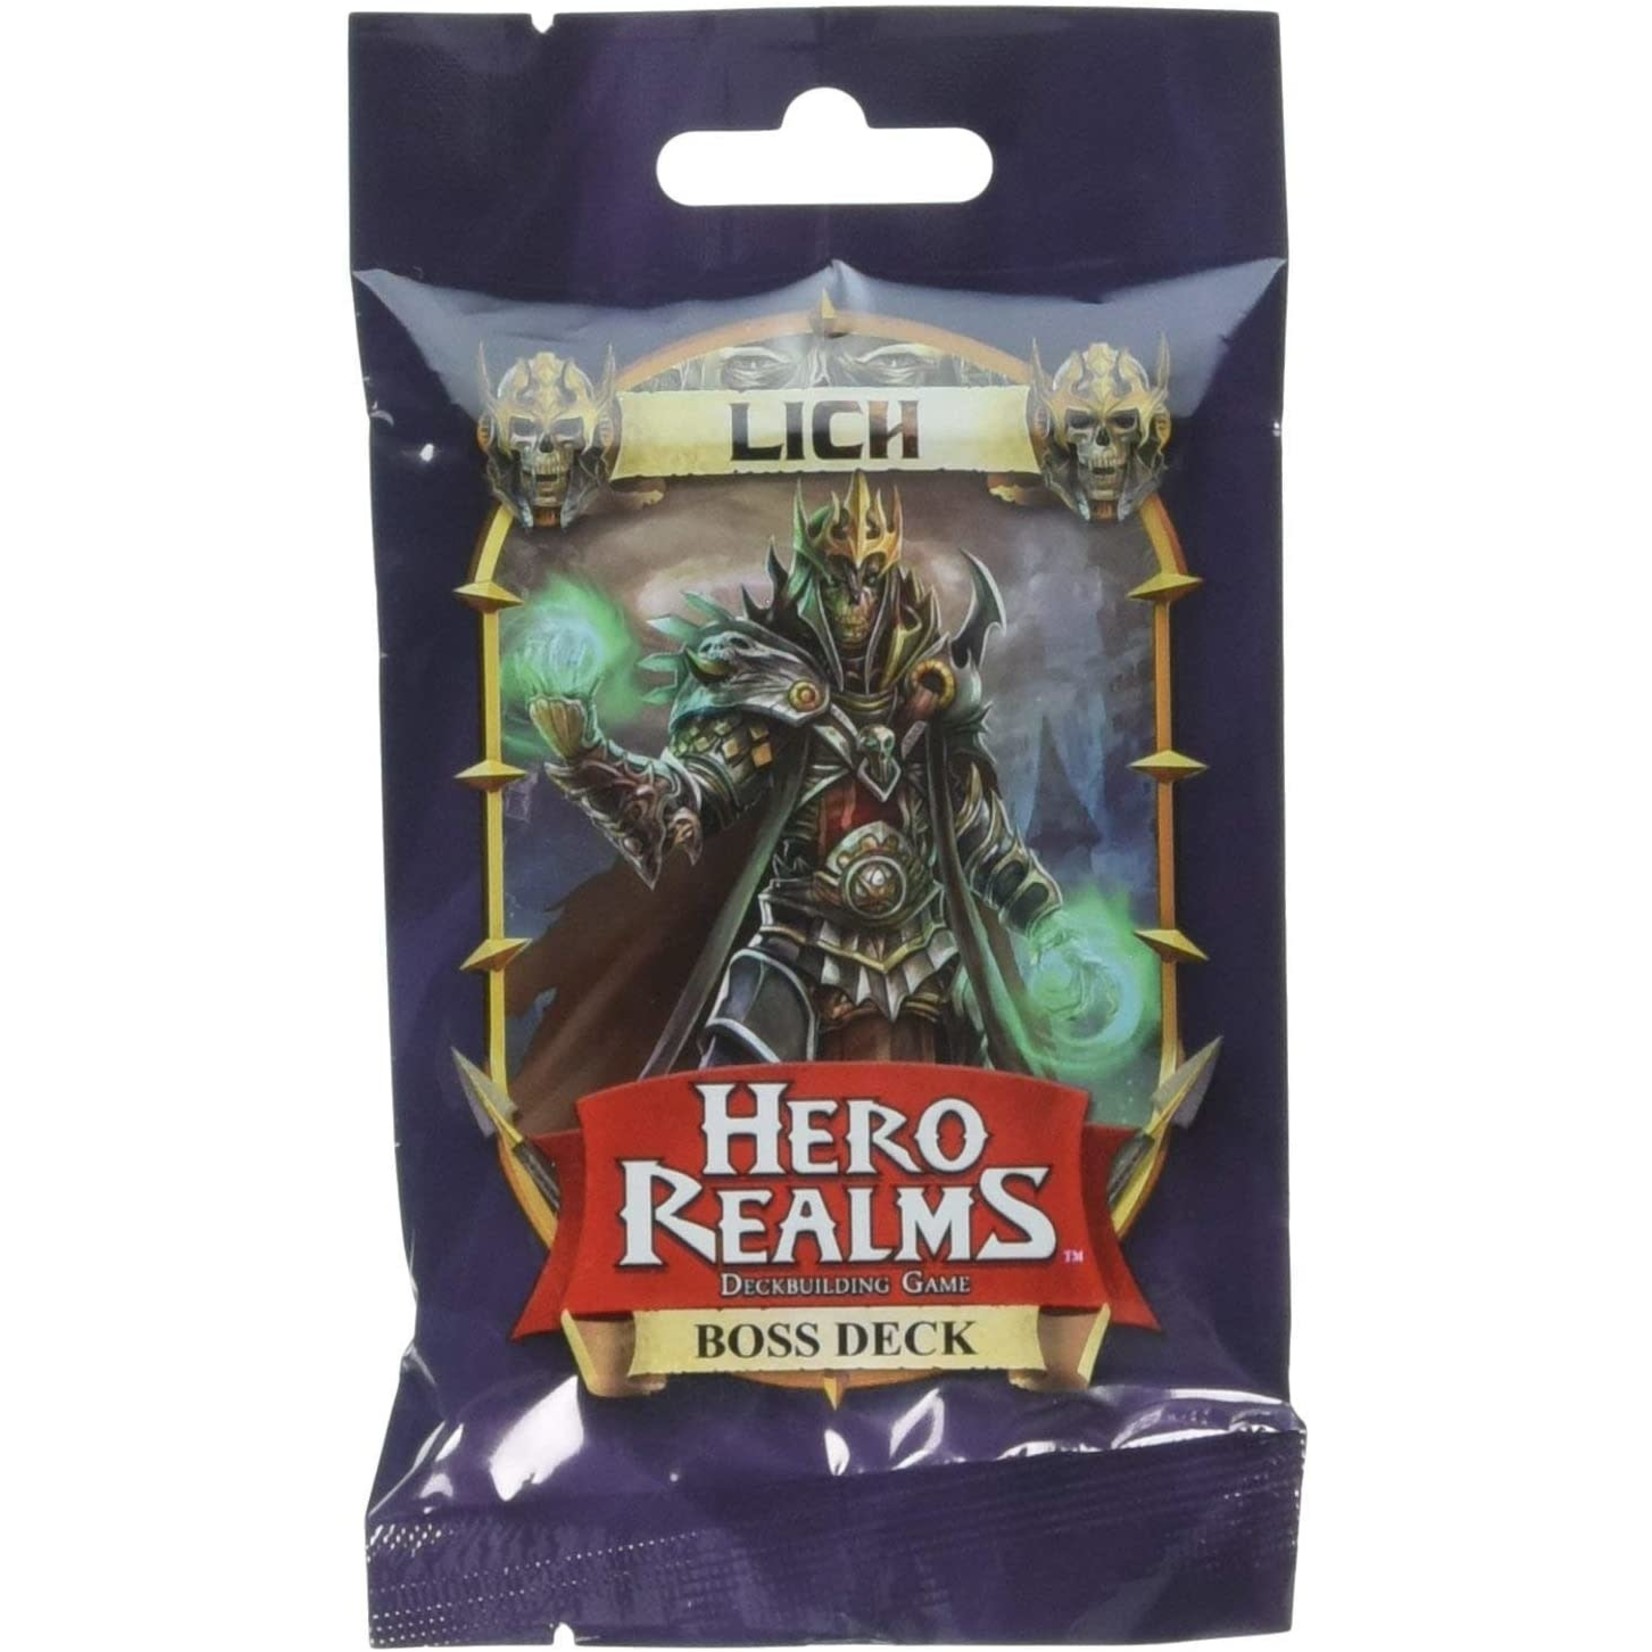 Wise Wizards Games Hero Realms: Lich Boss Deck